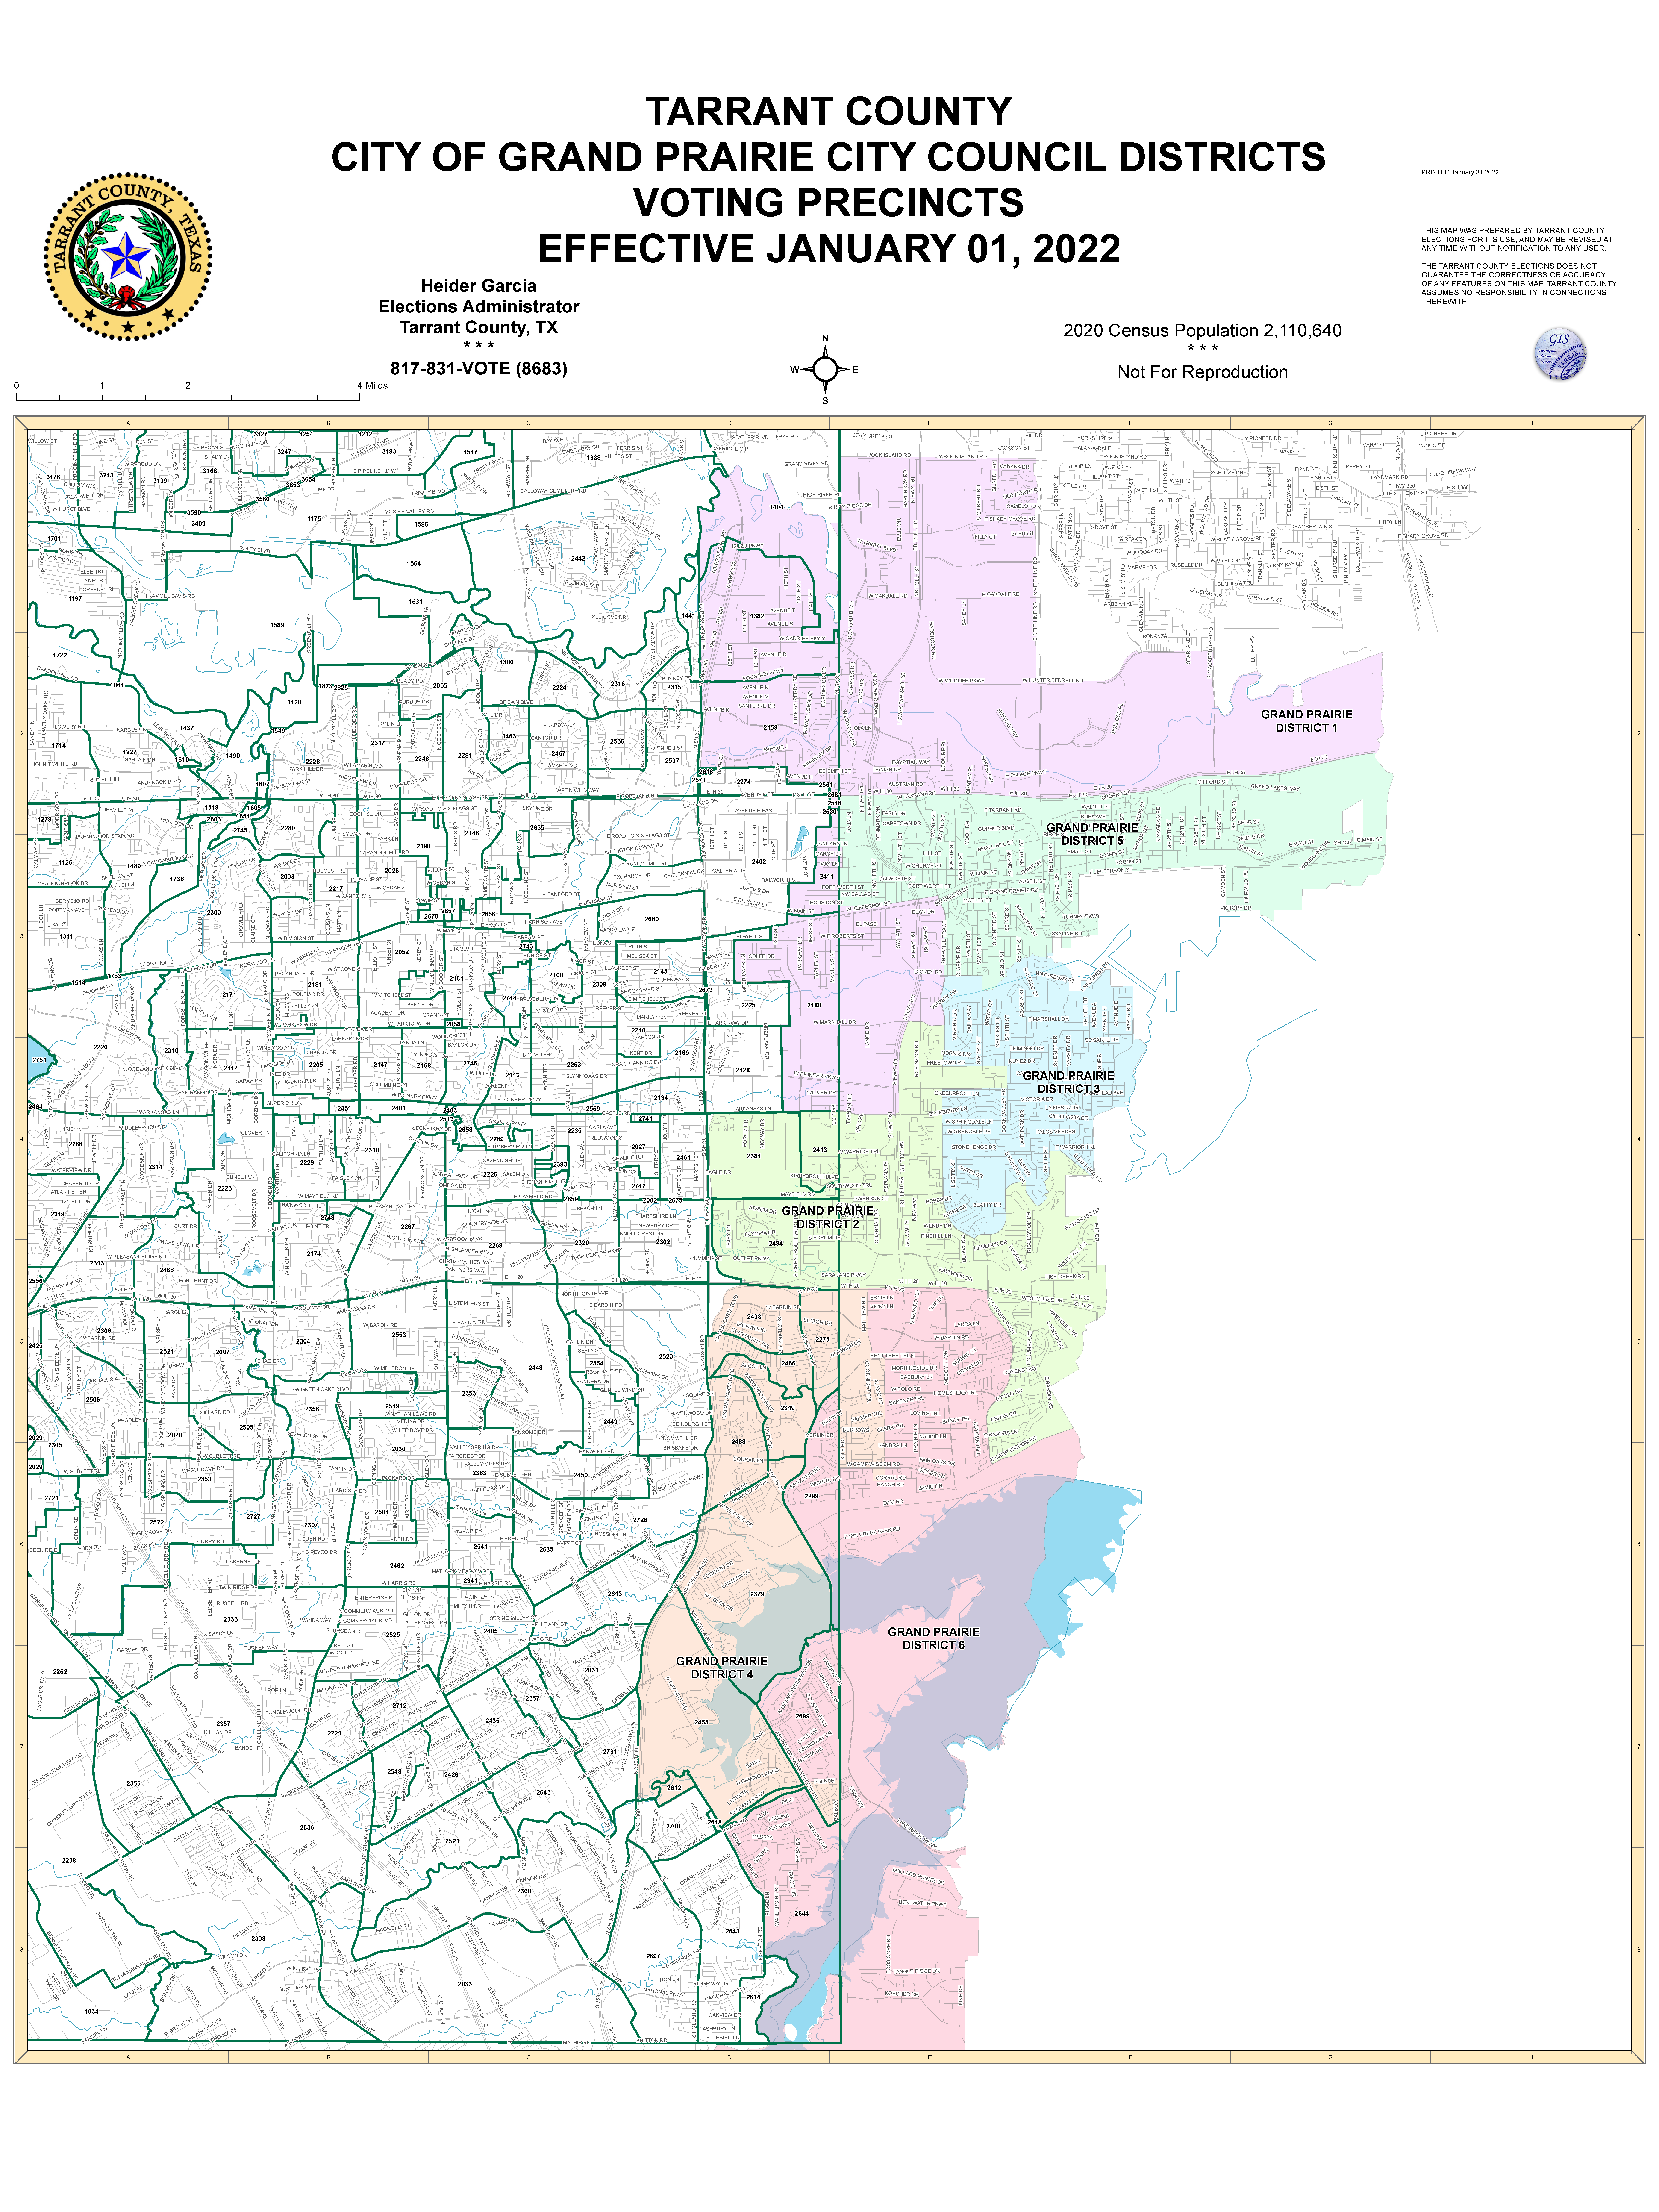 City of Grand Prairie Council Districts Map